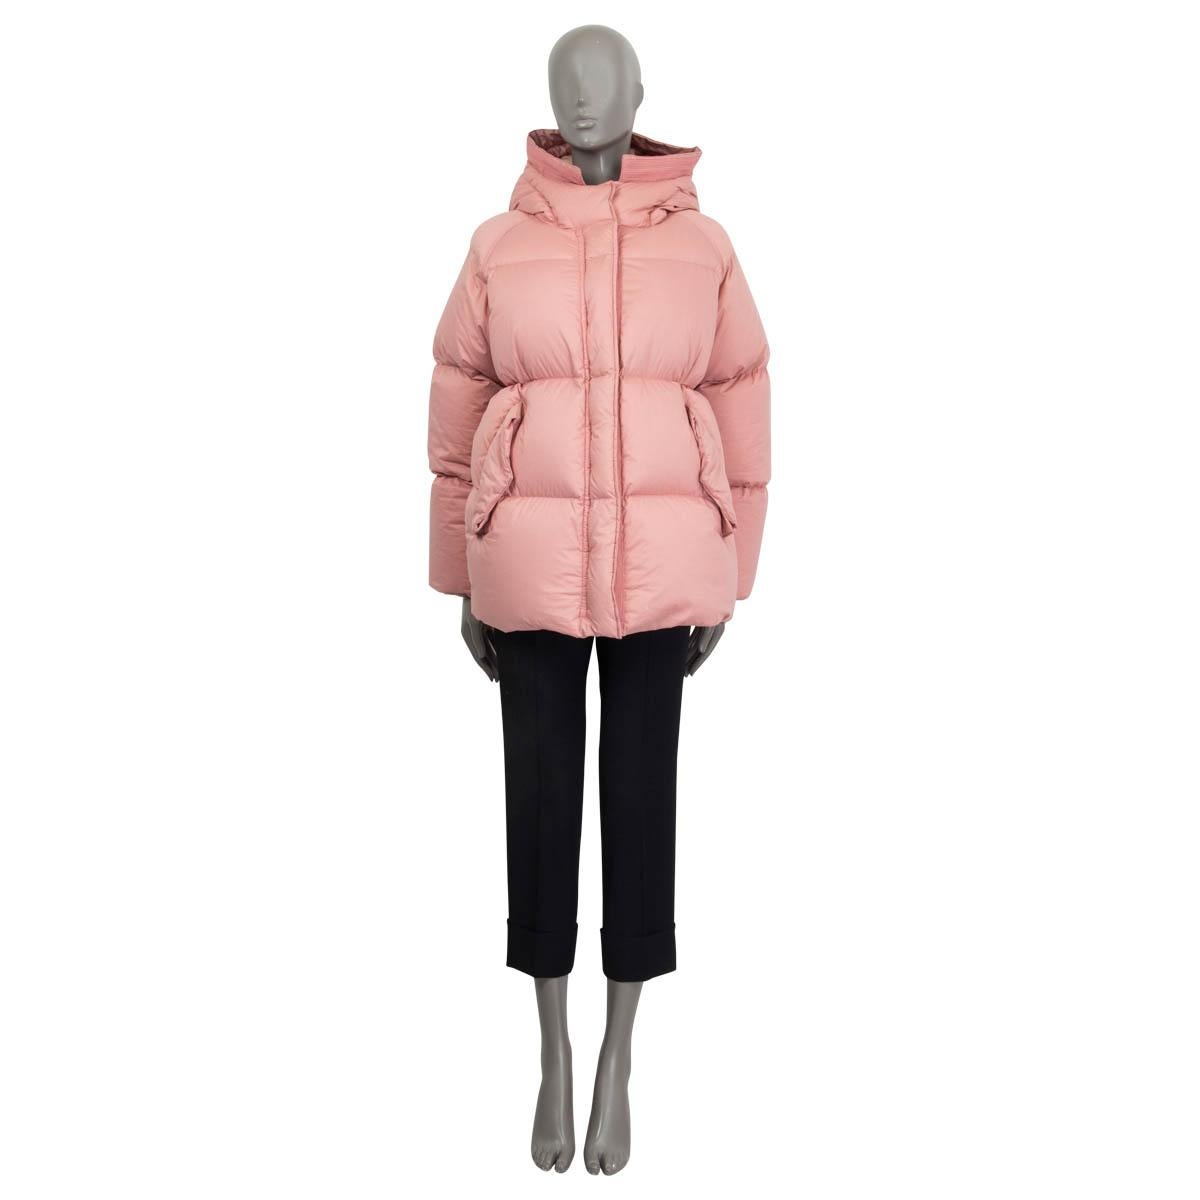 100% authentic Moncler Nerium puffer jacket in dusty rose cotton (100%). Features two flap pockets and can be modified with pink straps on the waist and the hood. Has long raglan sleeves (sleeve measurement taken from the neck). Opens with a zipper